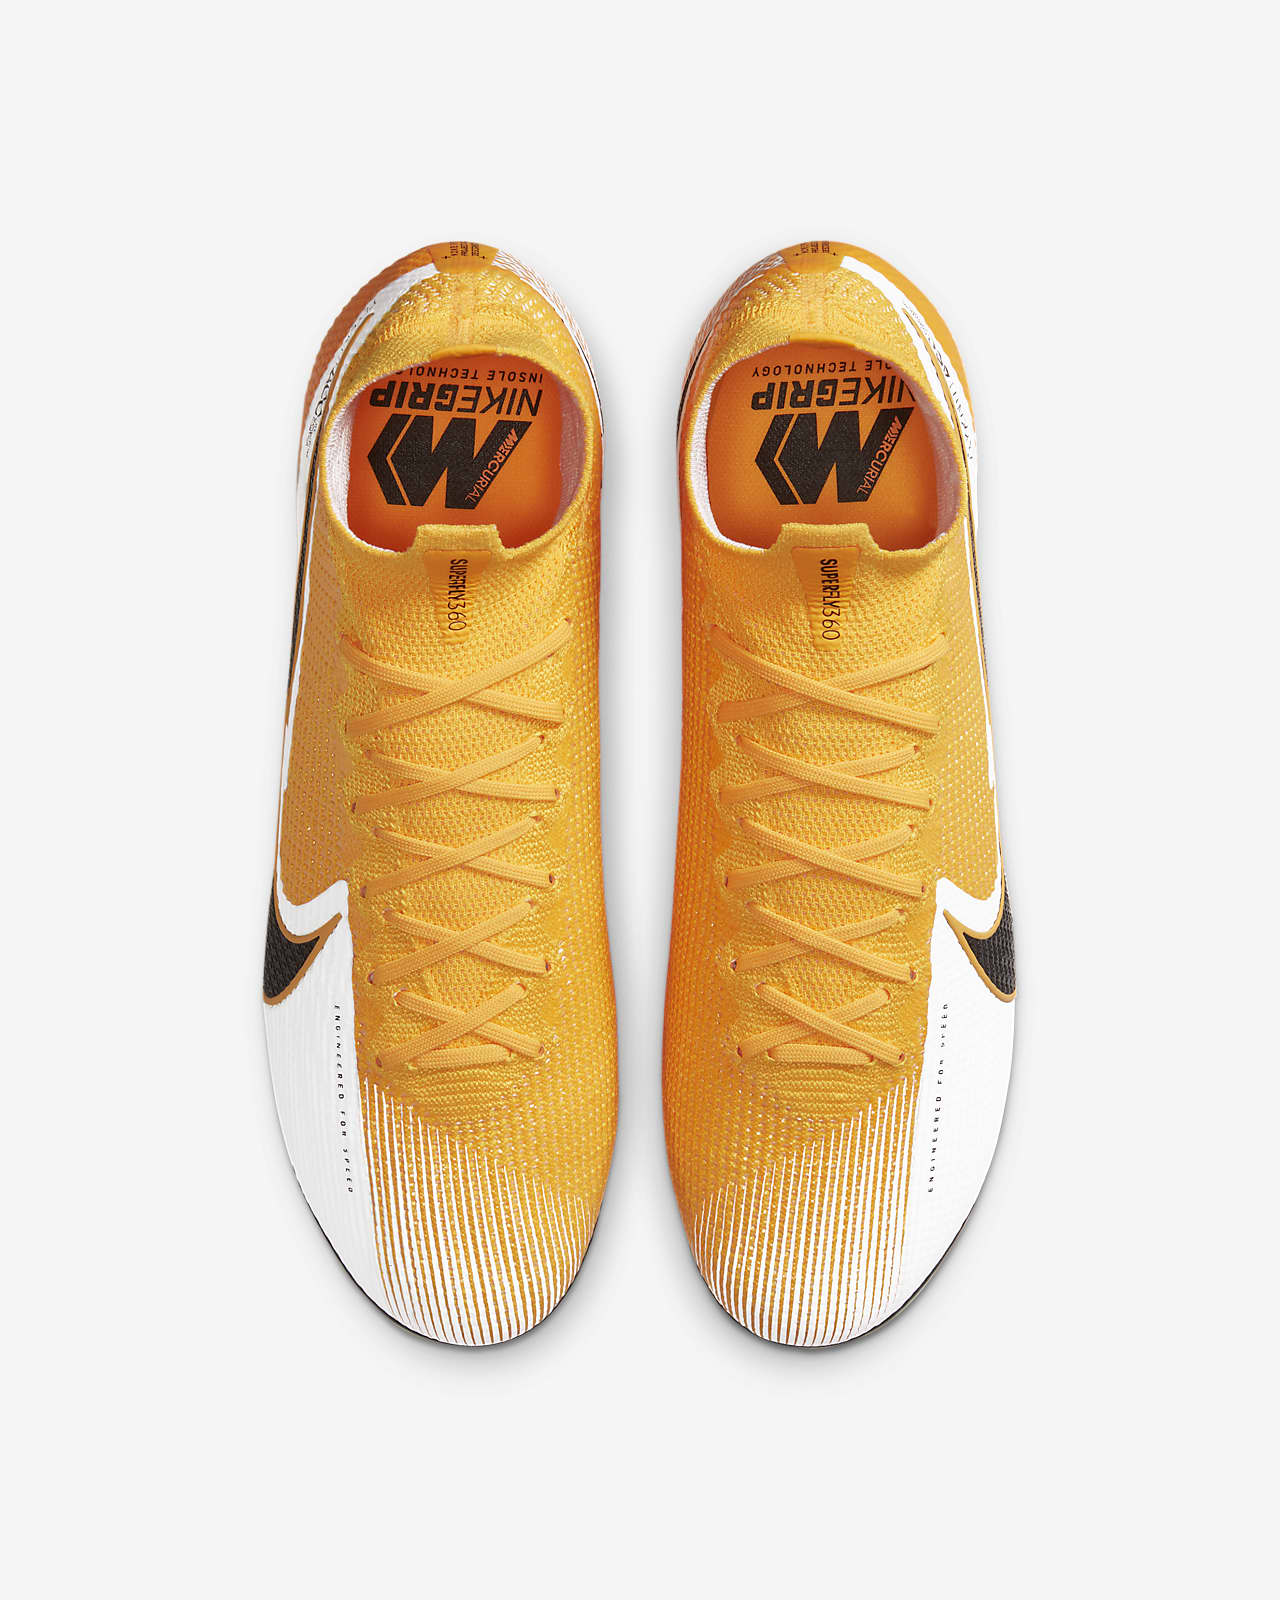 mercurial nike grip insole technology